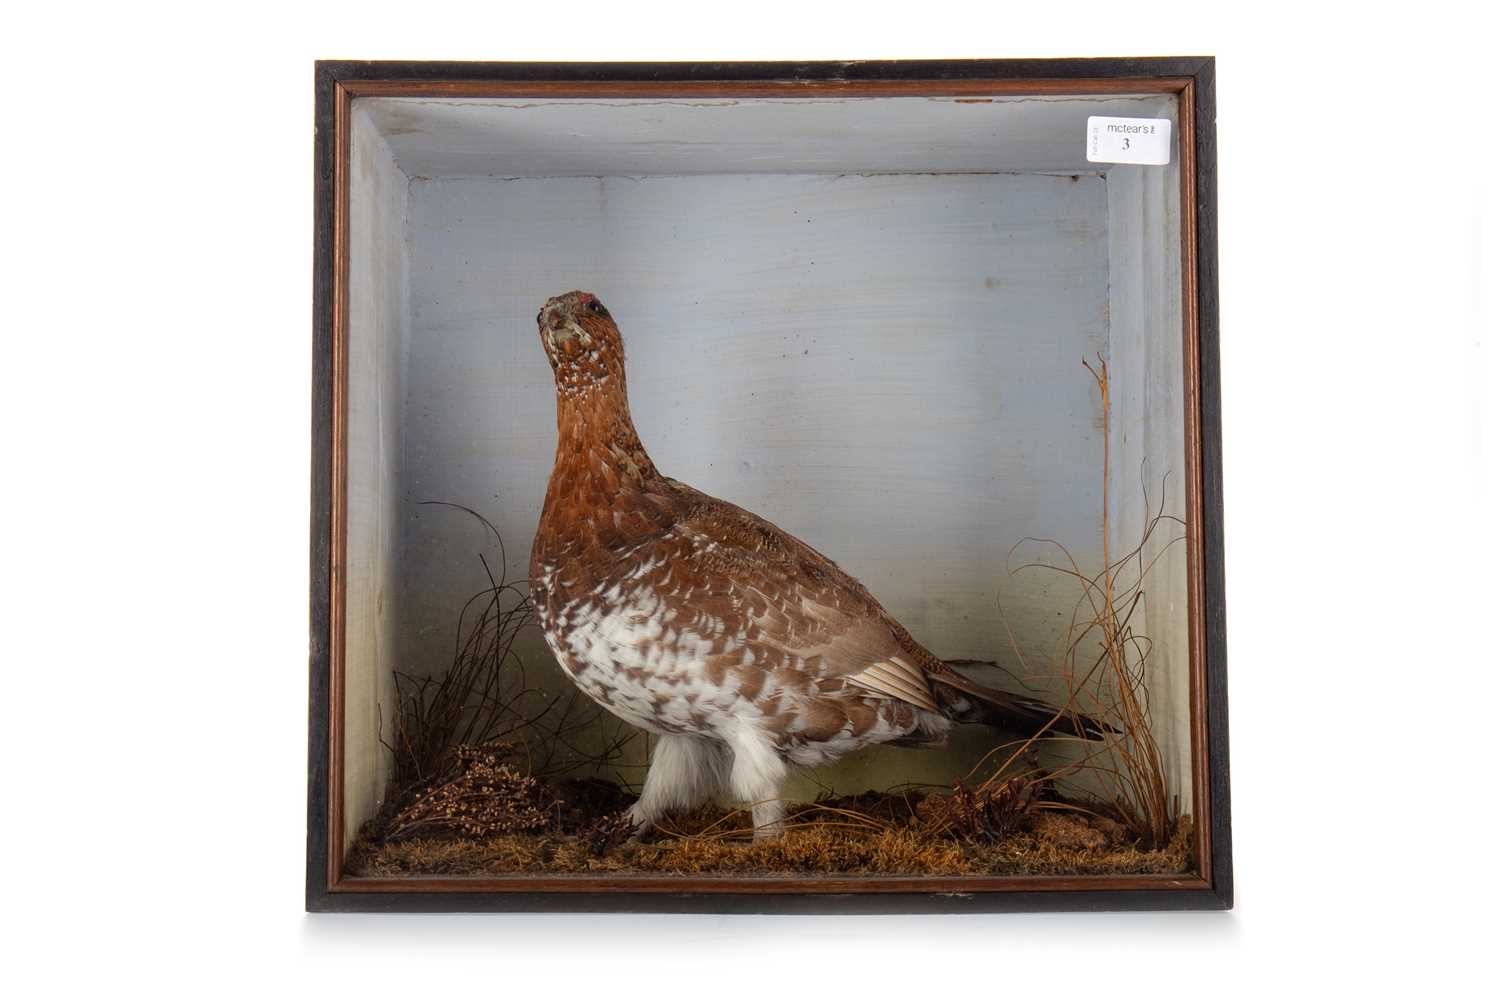 Lot 3 - VICTORIAN TAXIDERMY STUDY OF A GROUSE